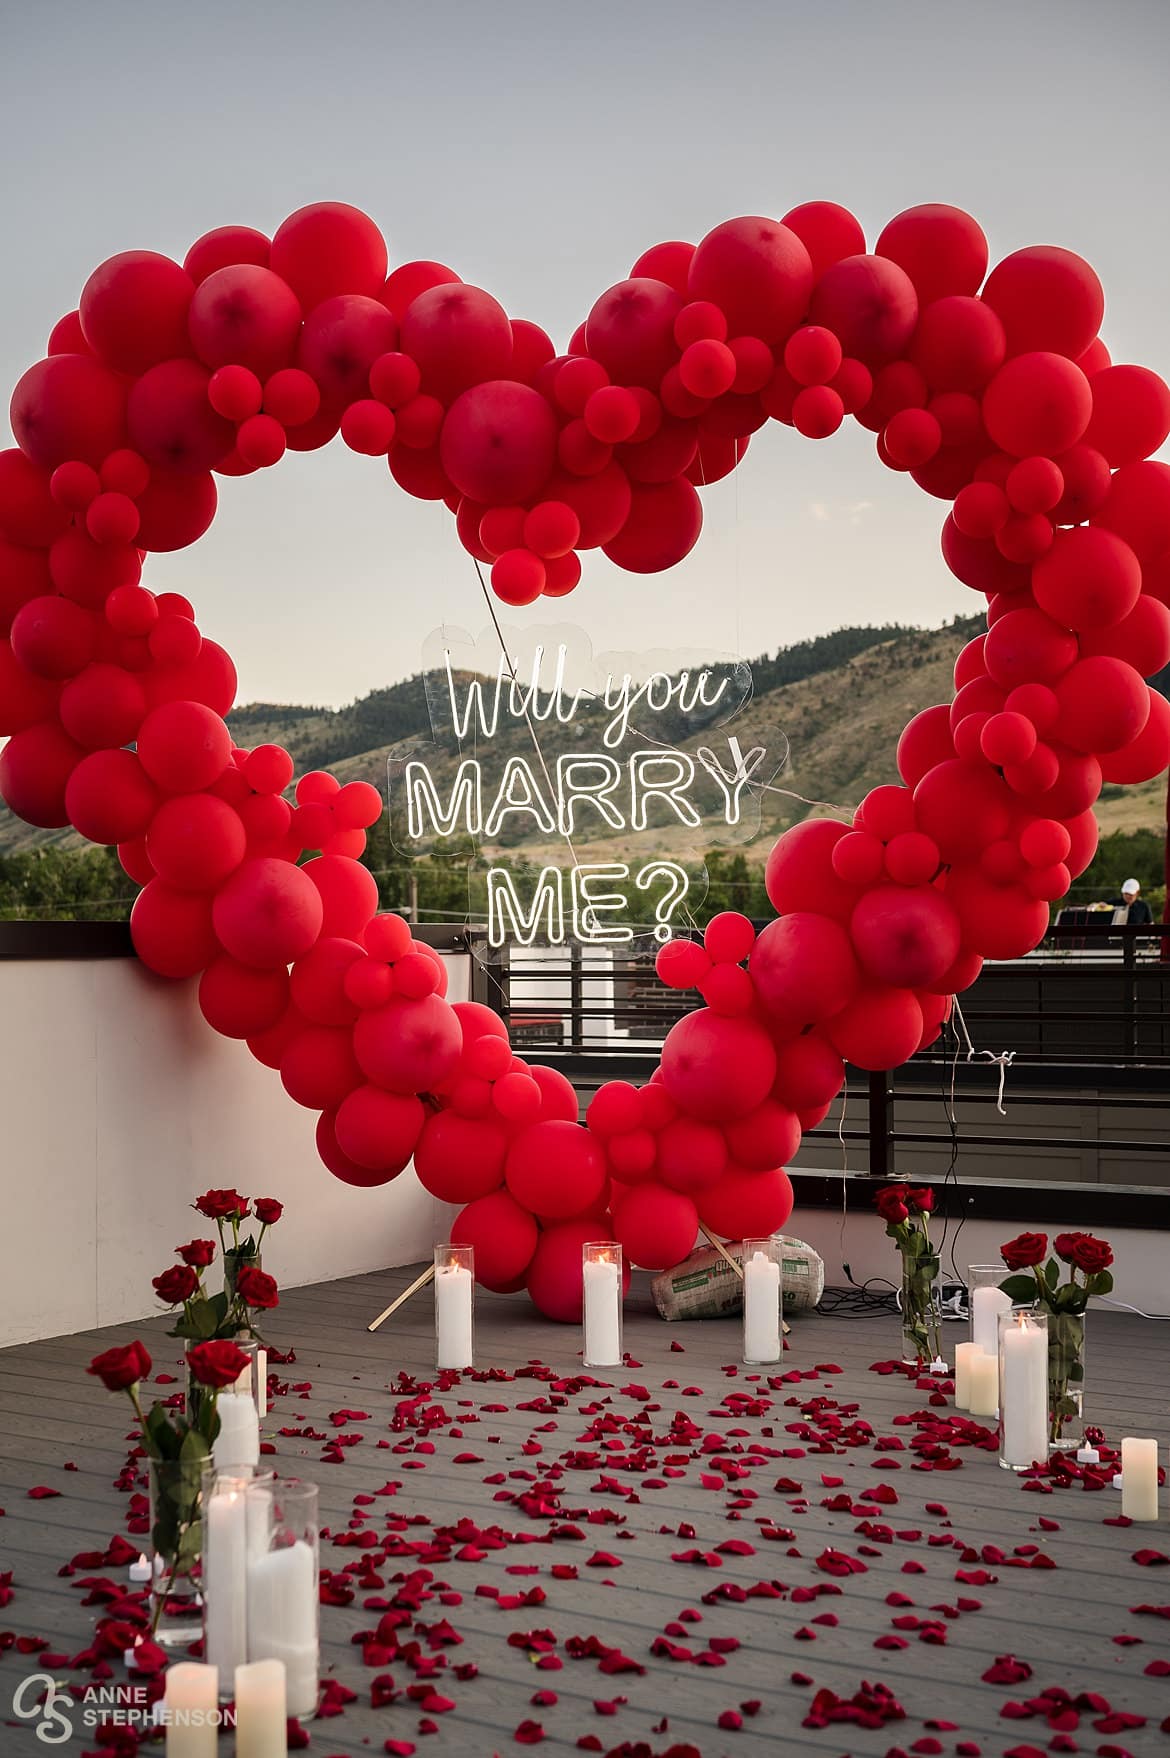 A romantic outdoor proposal scene in the summer golden hour with a heart-shaped red balloon display, and rose-strewn path lined with red roses and candles.